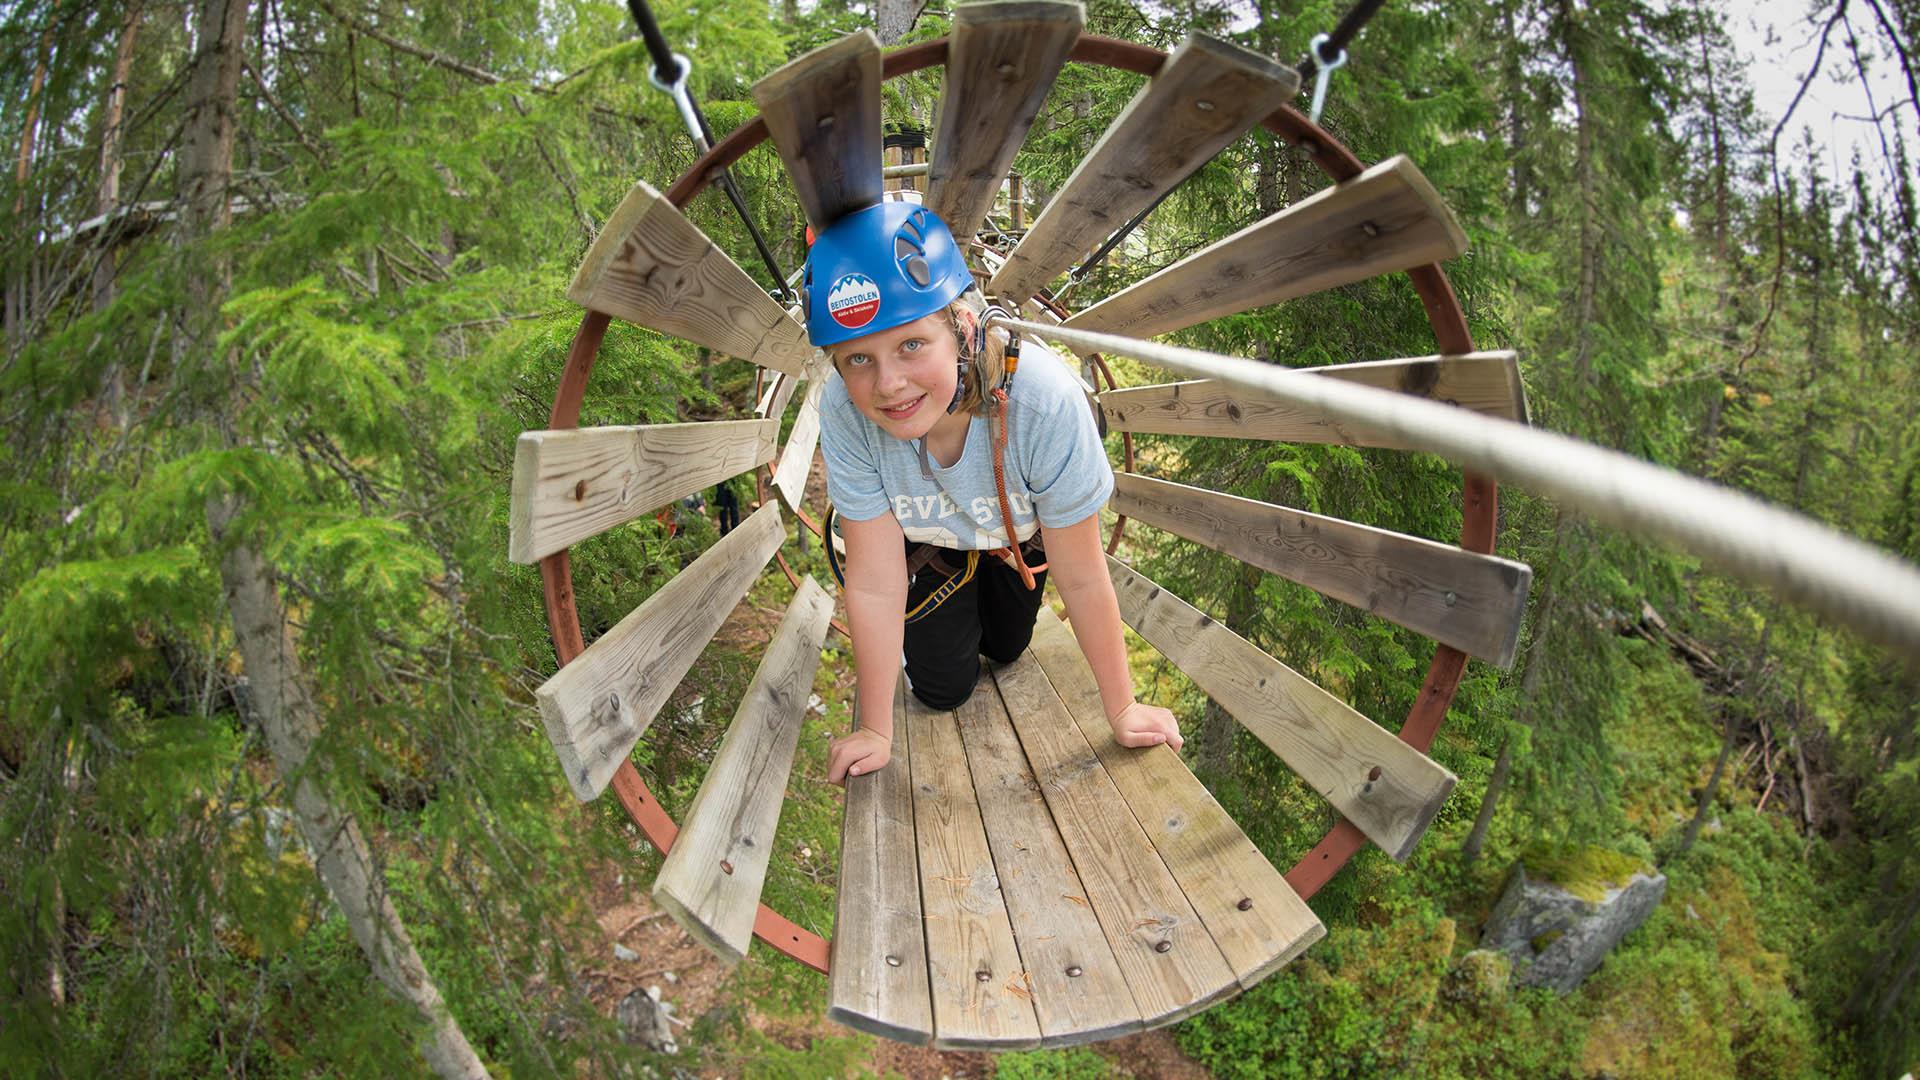 A girl crawls through a pipe made of wooden panels in a high rope course.